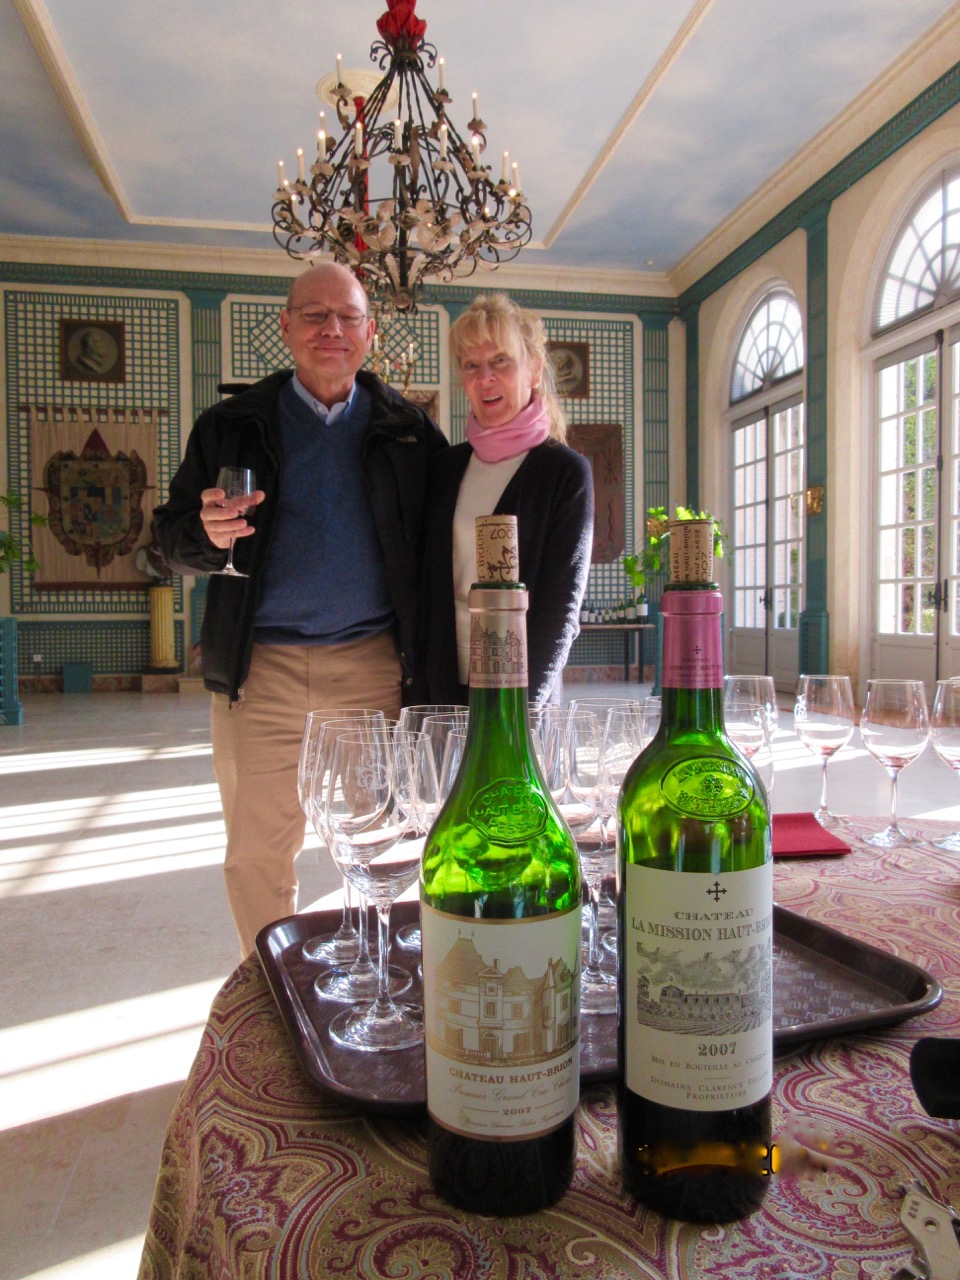 Drs. Dwight & Bobbi Oldham tasting theHaut-Brion and La Mission 2007's. Photo by Dr. Melvin Oakley.